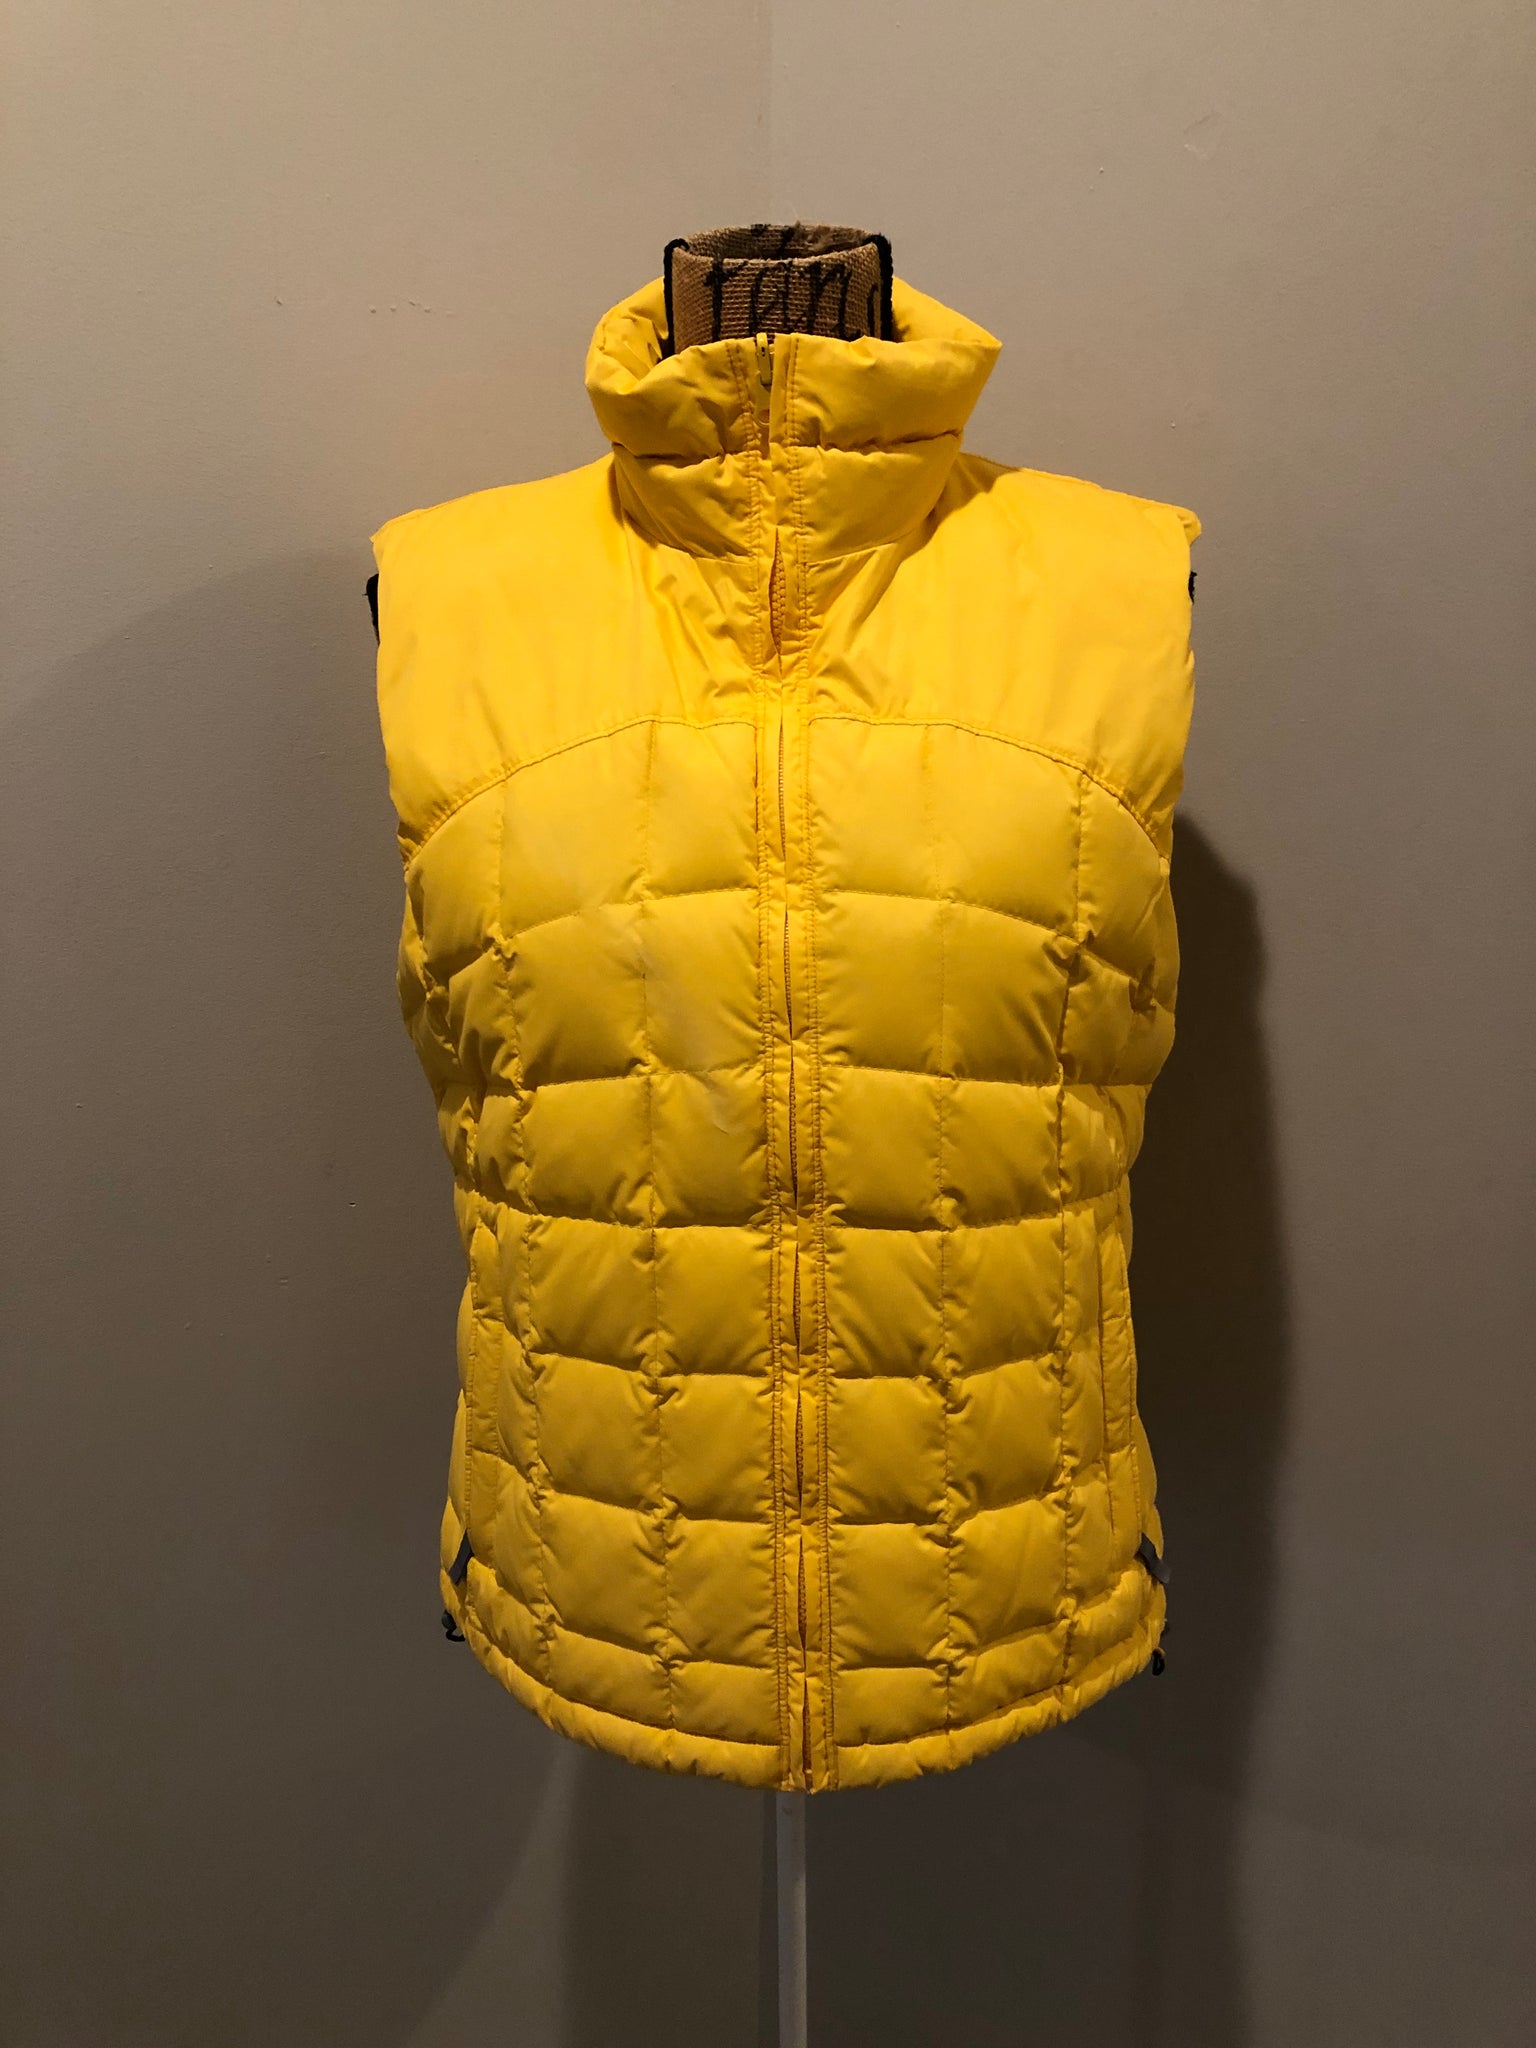 Columbia Yellow Down Filled Puffer Vest – KingsPIER vintage